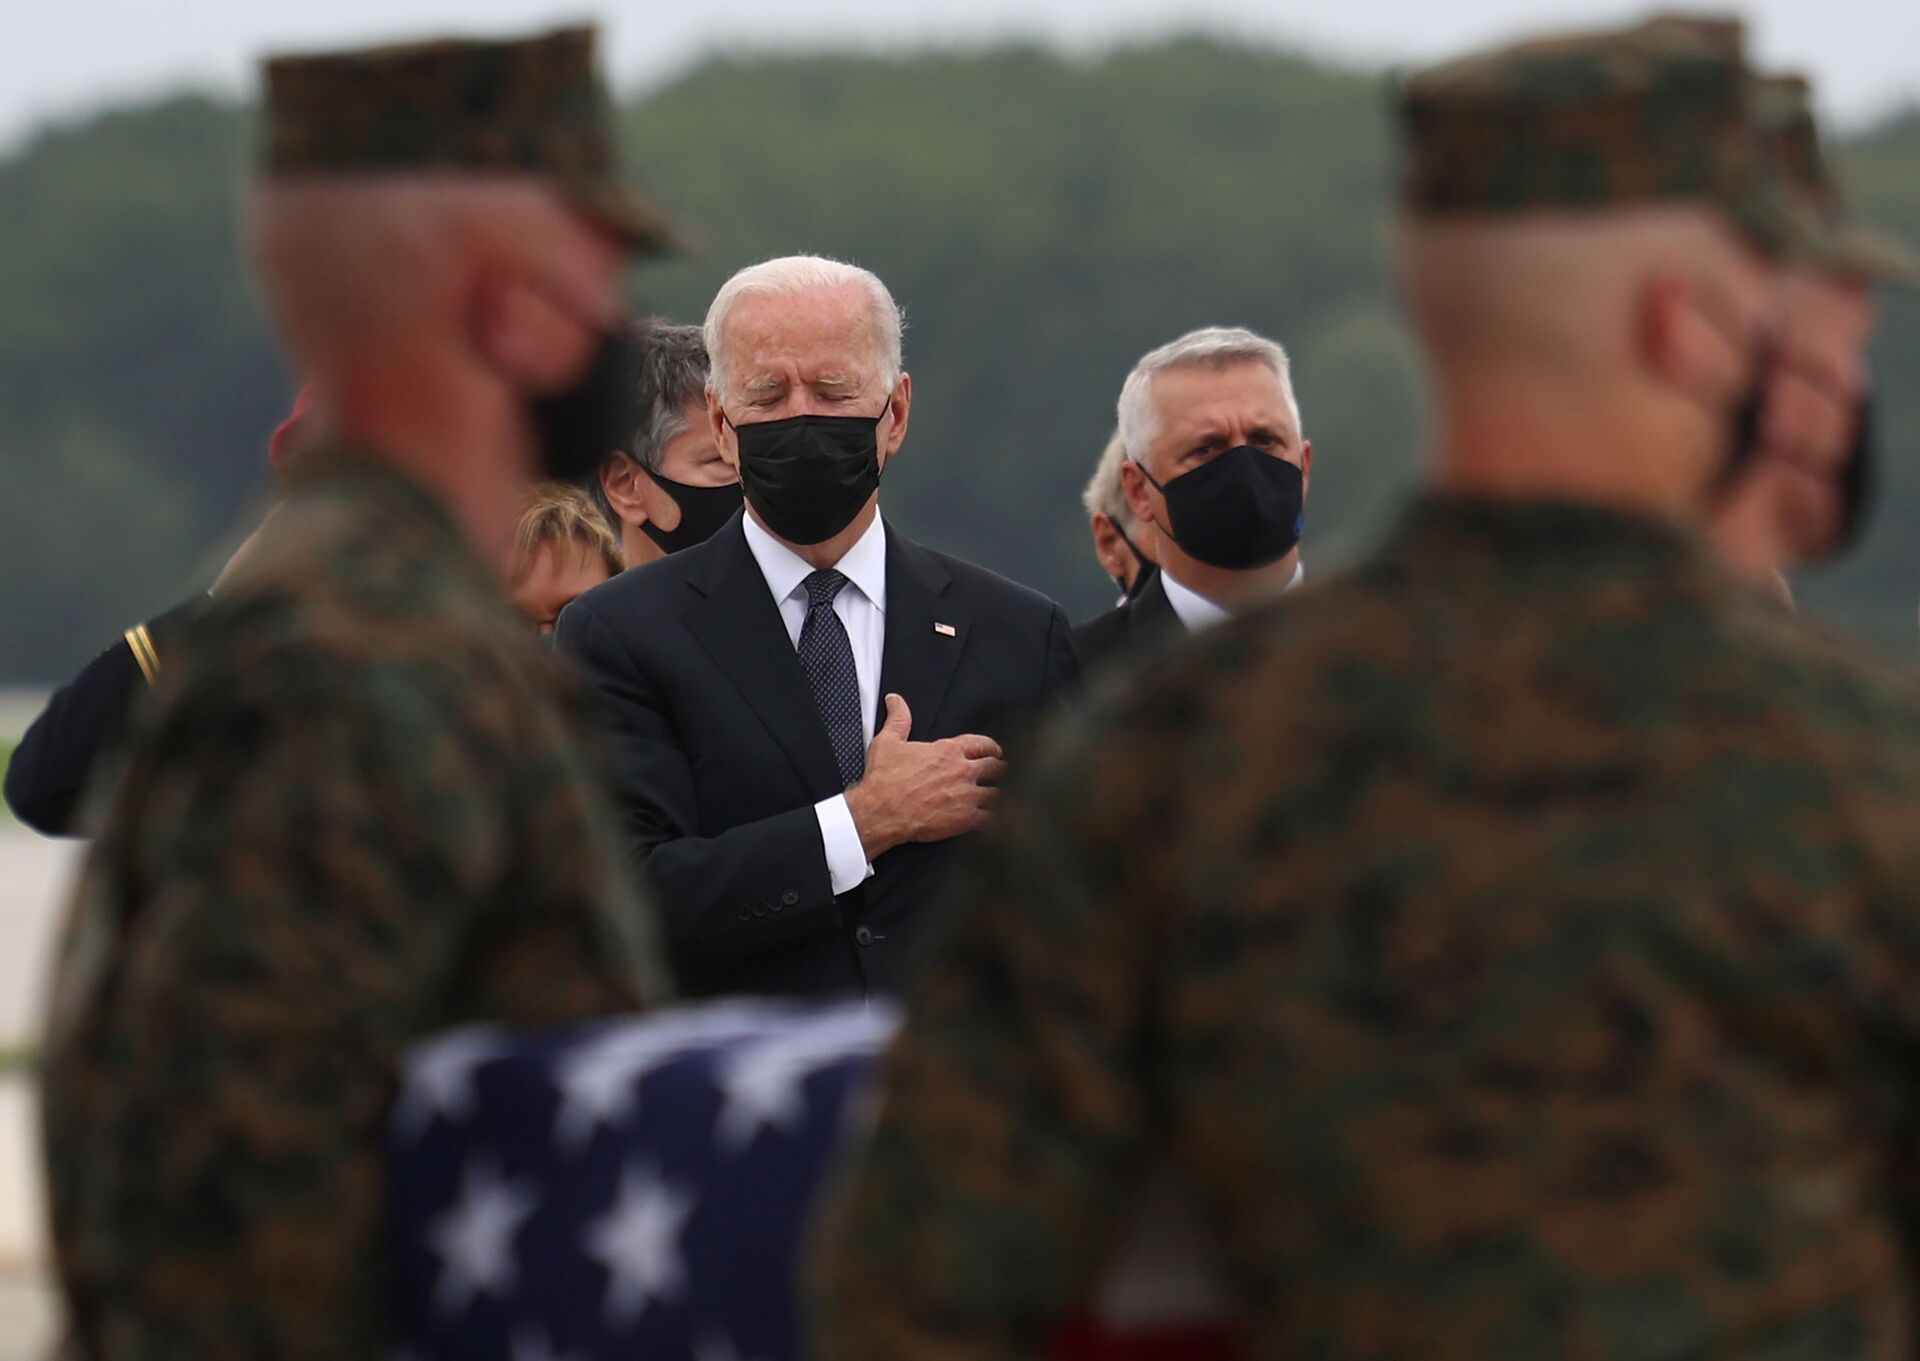 U.S. President Joe Biden honors the dignified transfer of the remains of U.S. military service members who were killed by an August 26 suicide bombing at Kabul's Hamid Karzai International Airport, at Dover Air Force Base in Dover, Delaware, U.S., August 29, 2021. REUTERS/Tom Brenner - Sputnik International, 1920, 07.09.2021